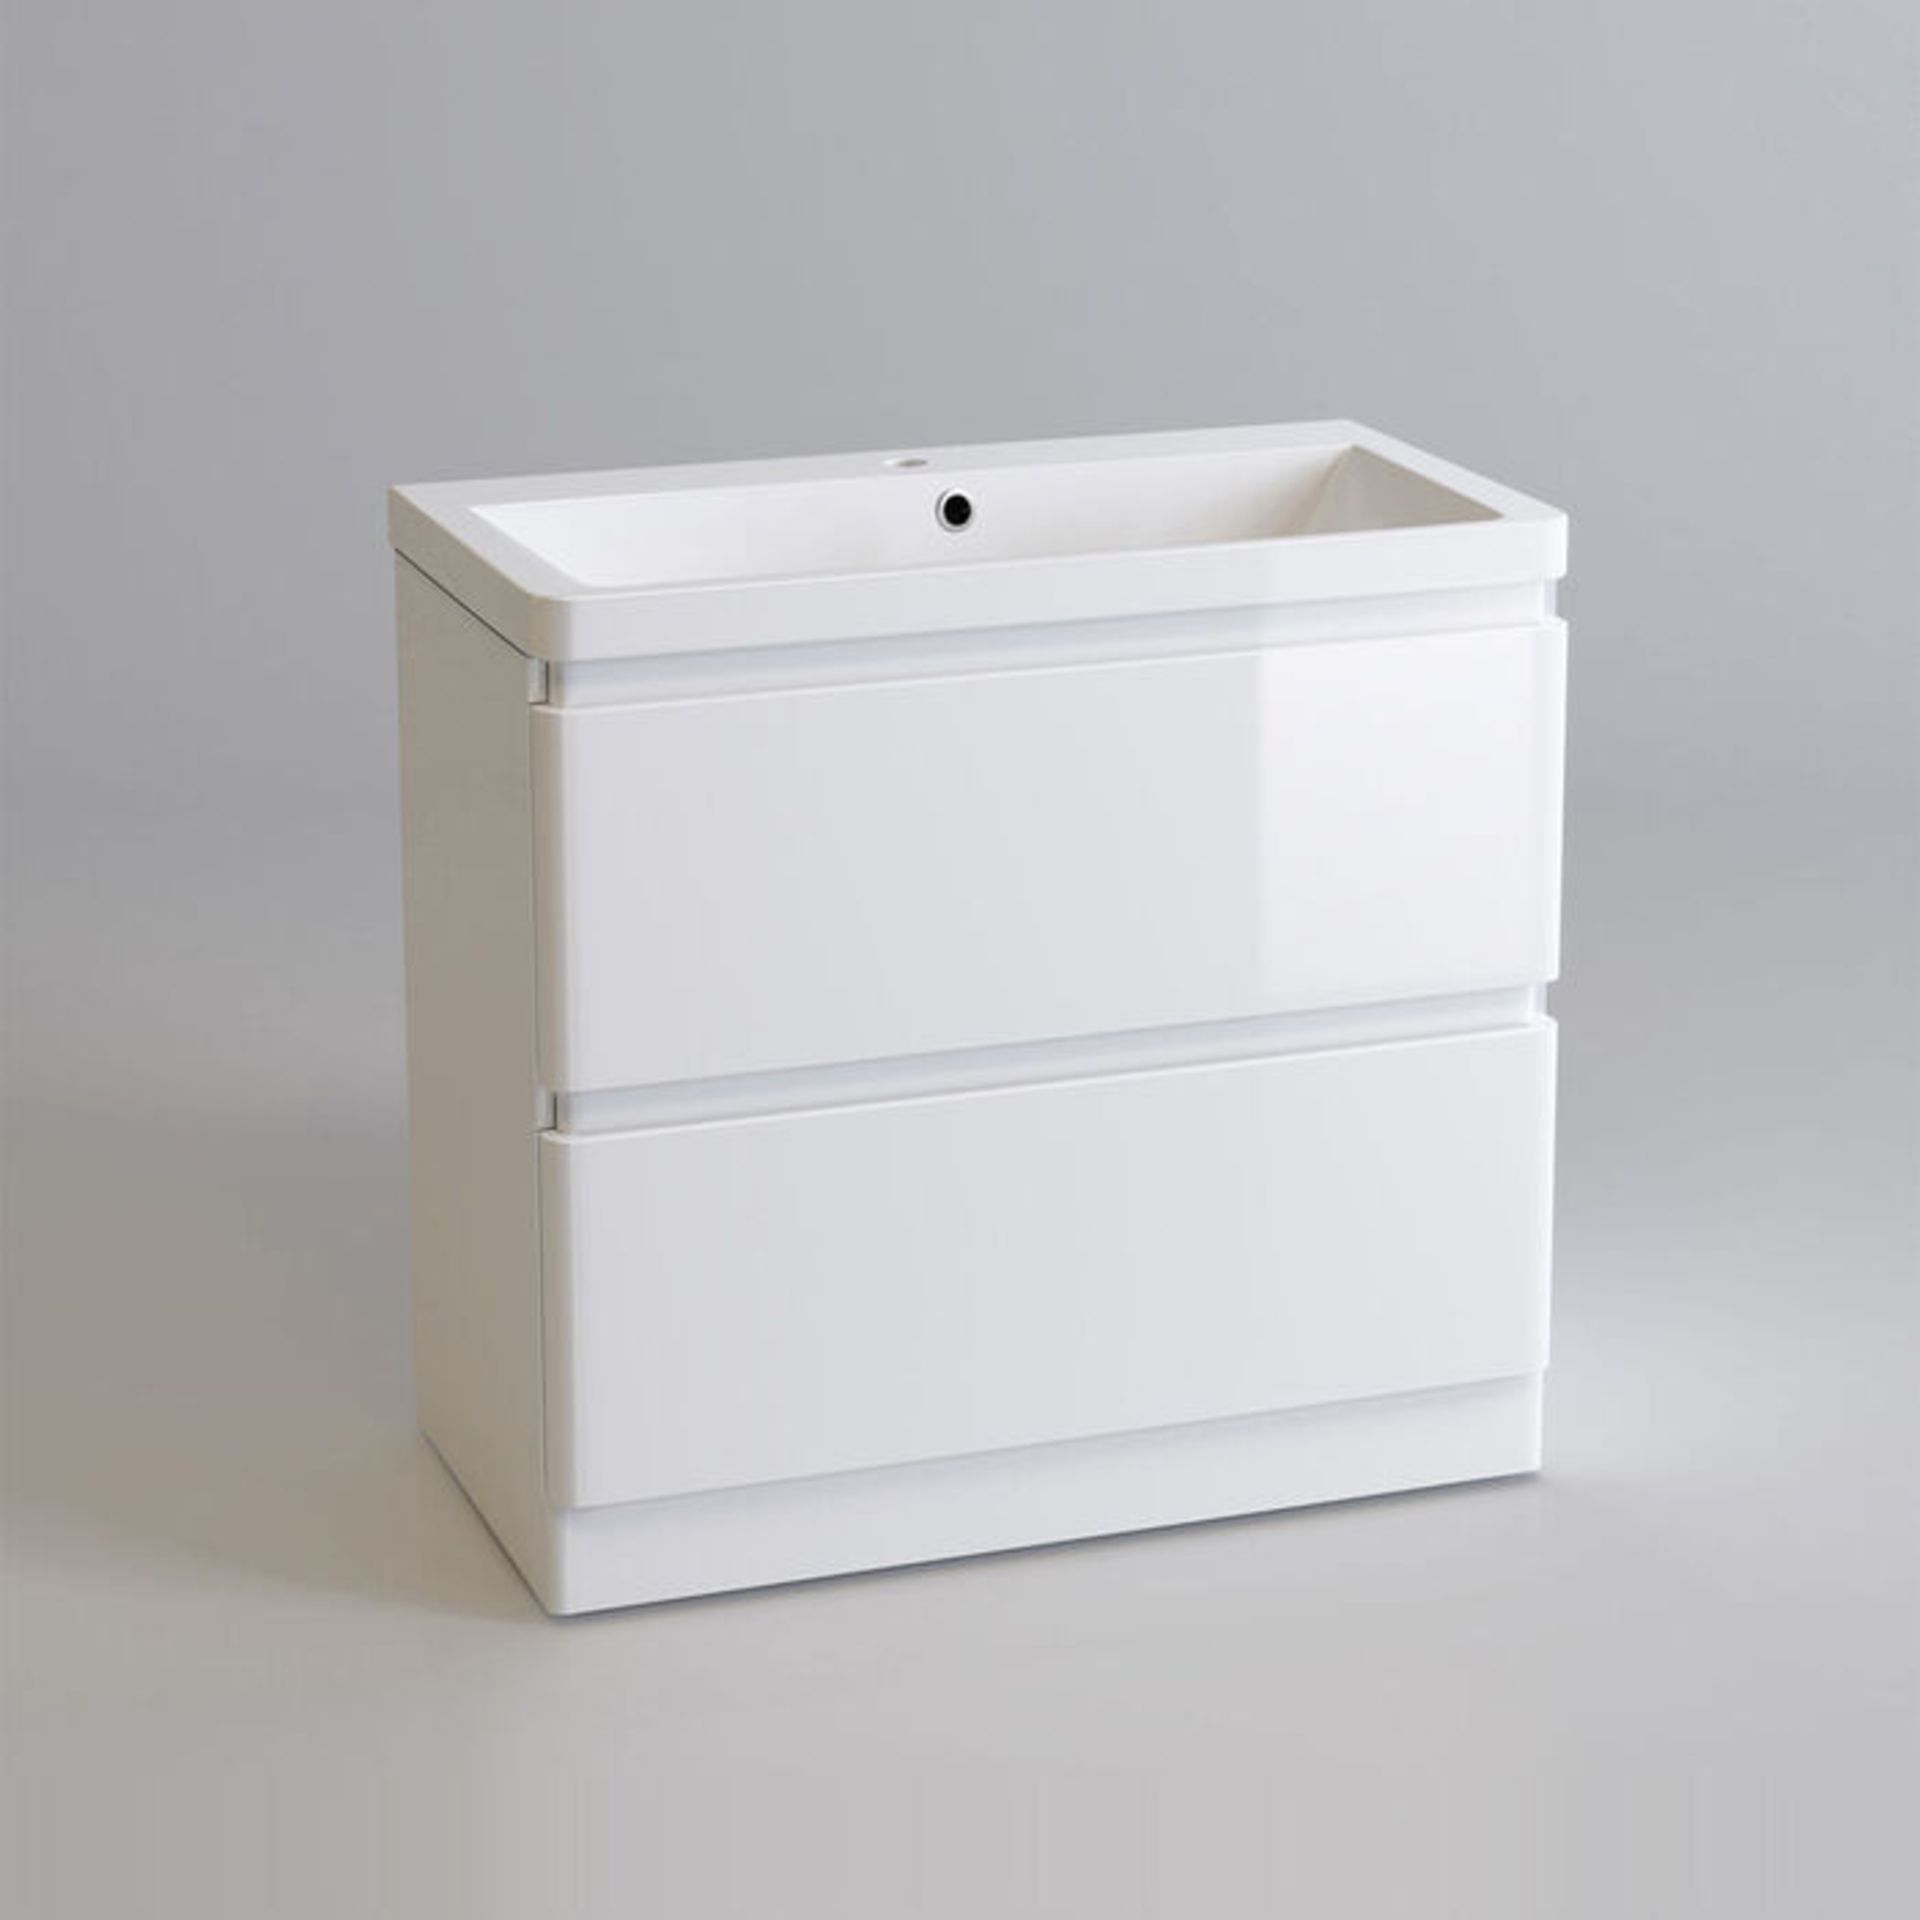 (PC29) 800mm Denver Gloss White Built In Sink Drawer Unit - Floor Standing. RRP £649.99. Comes...( - Image 4 of 5